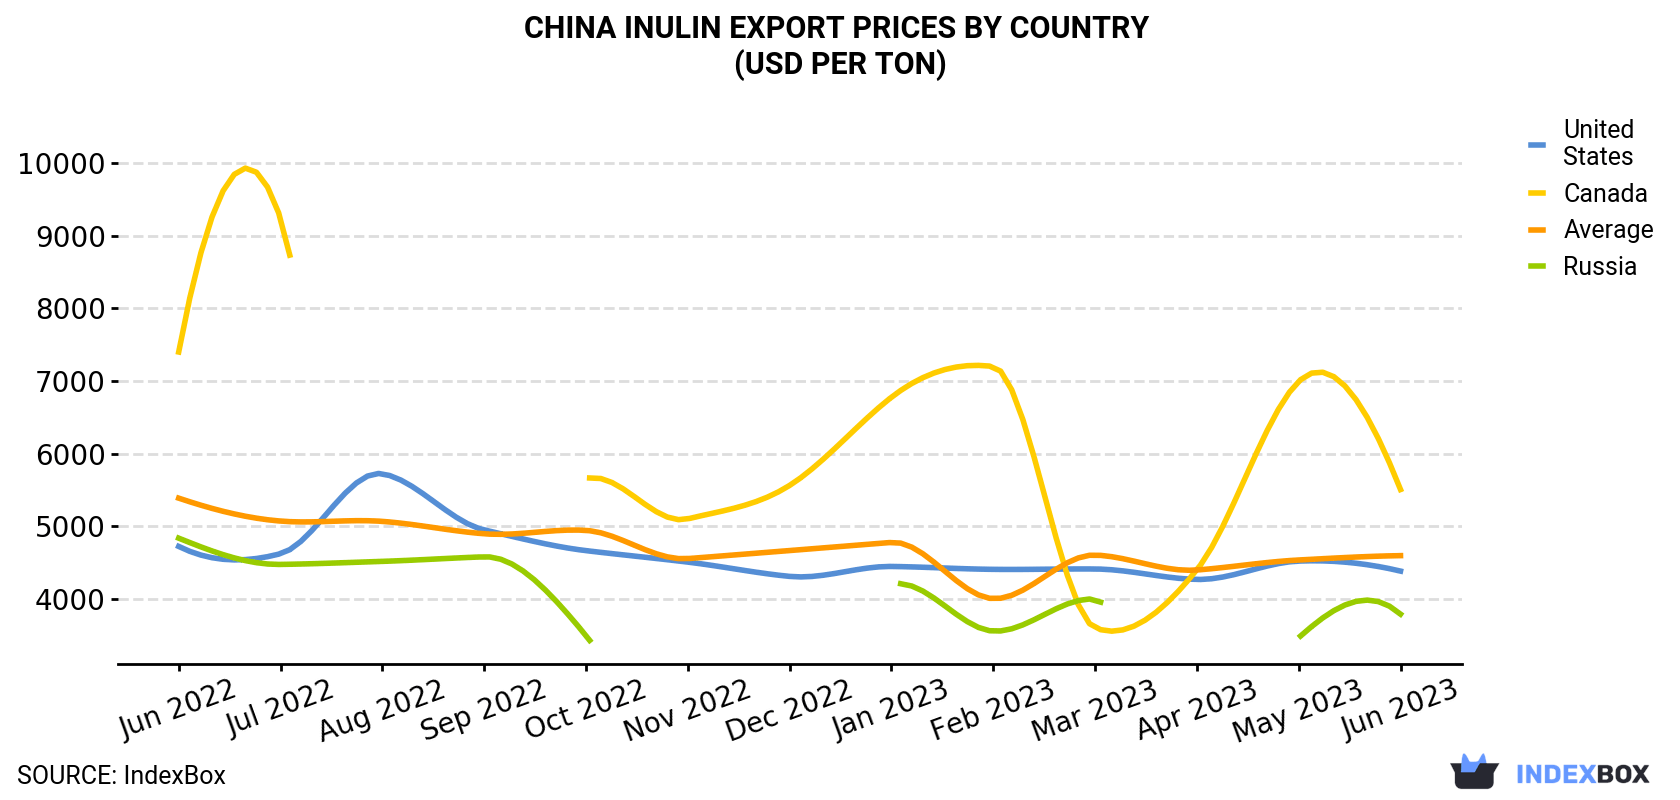 China Inulin Export Prices By Country (USD Per Ton)